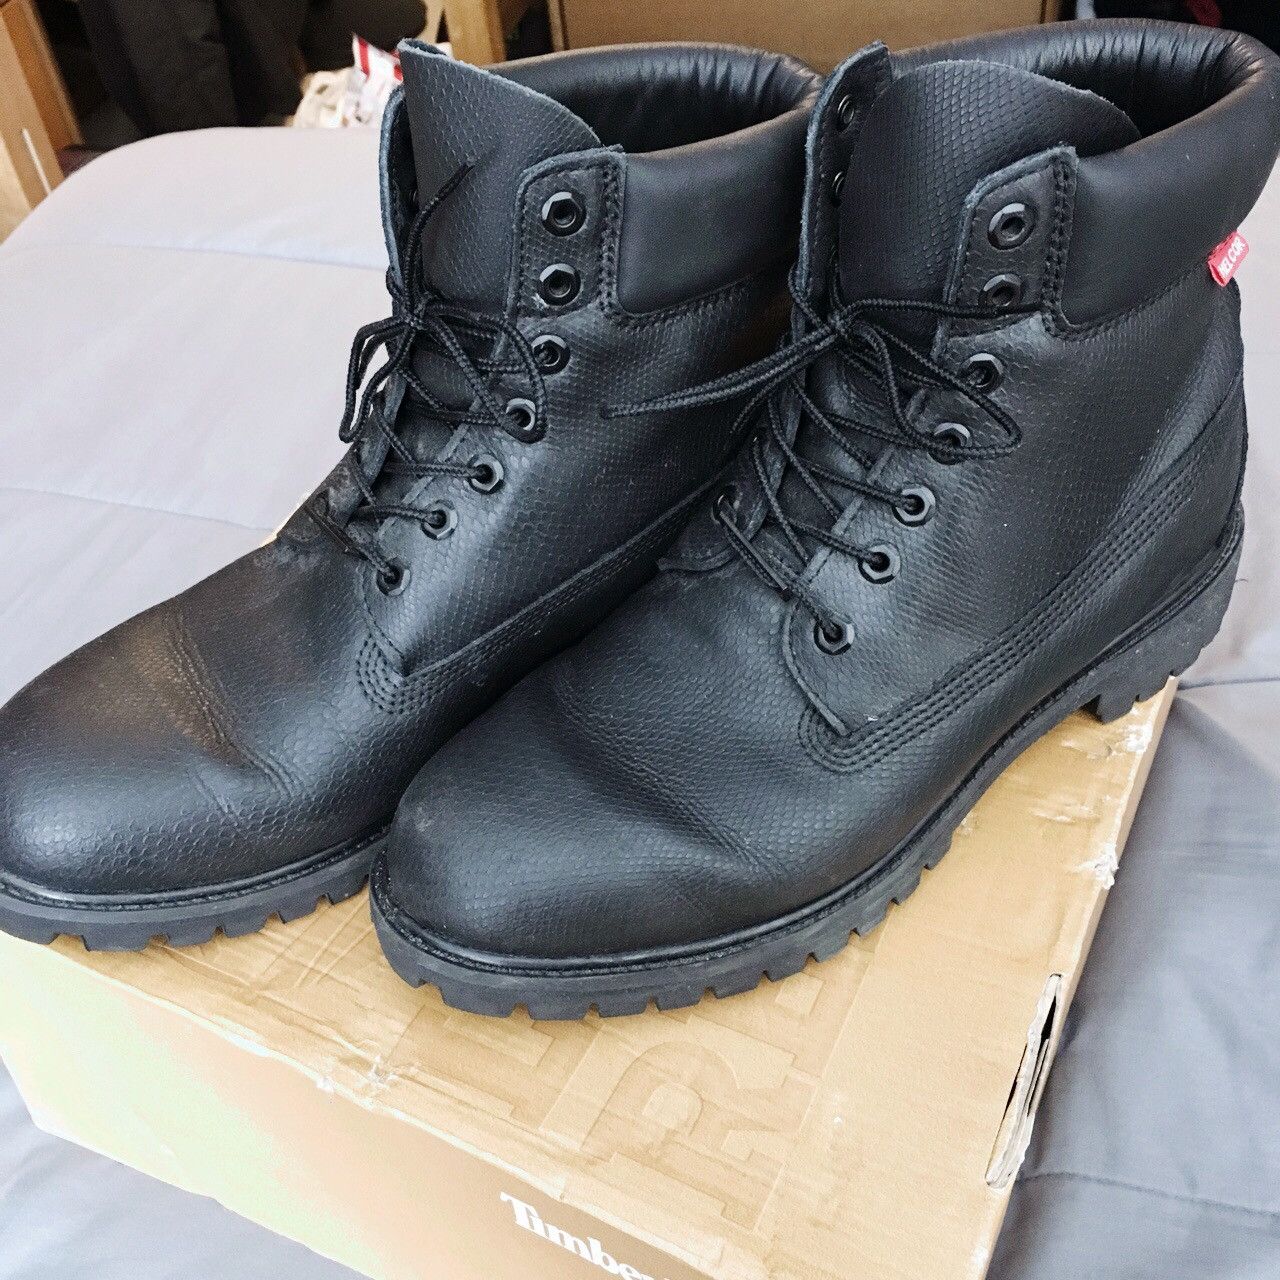 Timberland 6" Premium Black Exotic Helcor Leather Timberland Boots [6859A] Size US 12 / EU 45 - 2 Preview